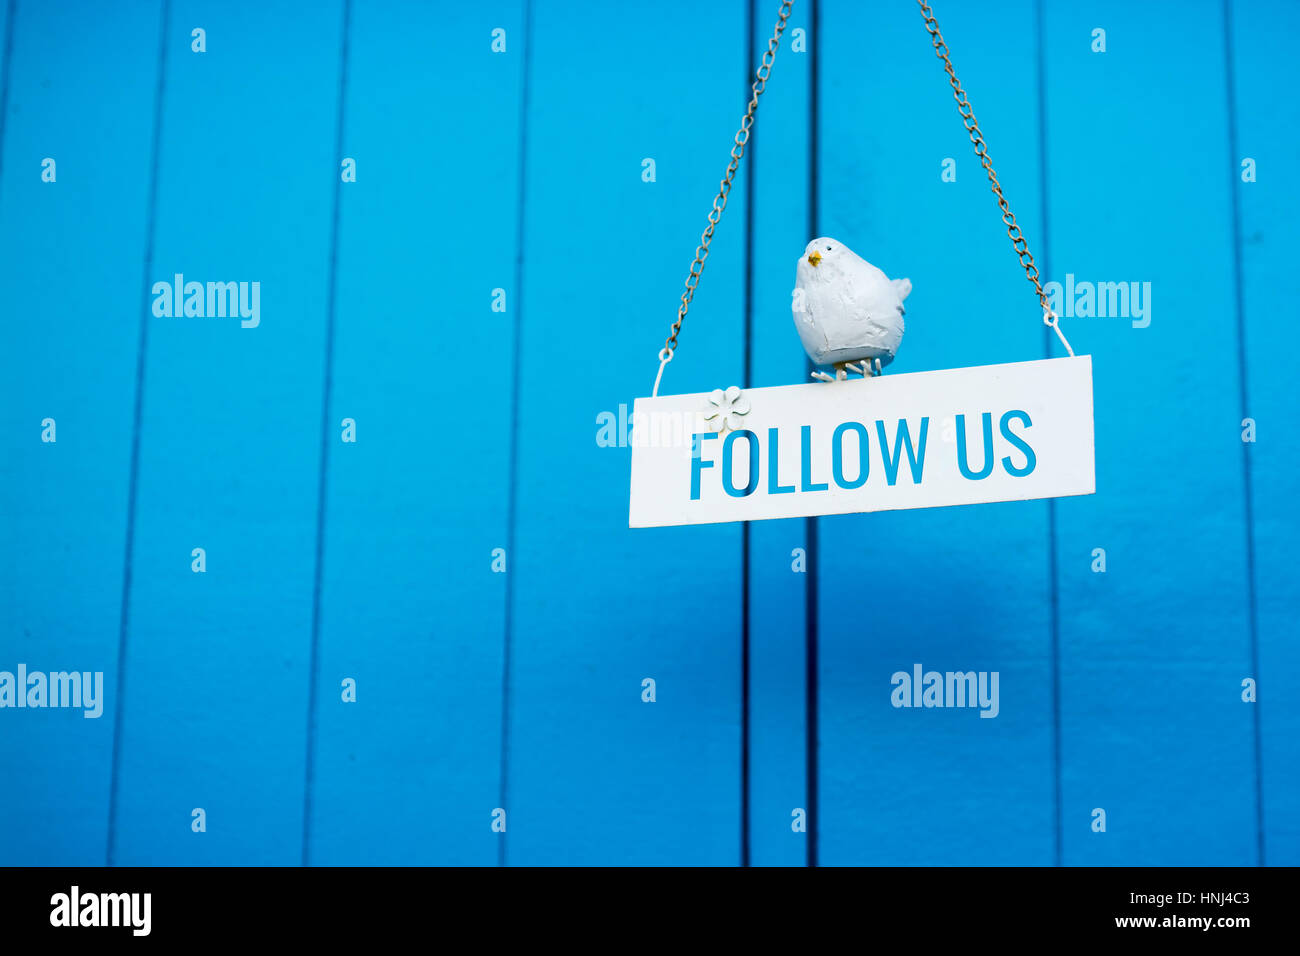 Follow Us signboard on a blue wooden background Stock Photo